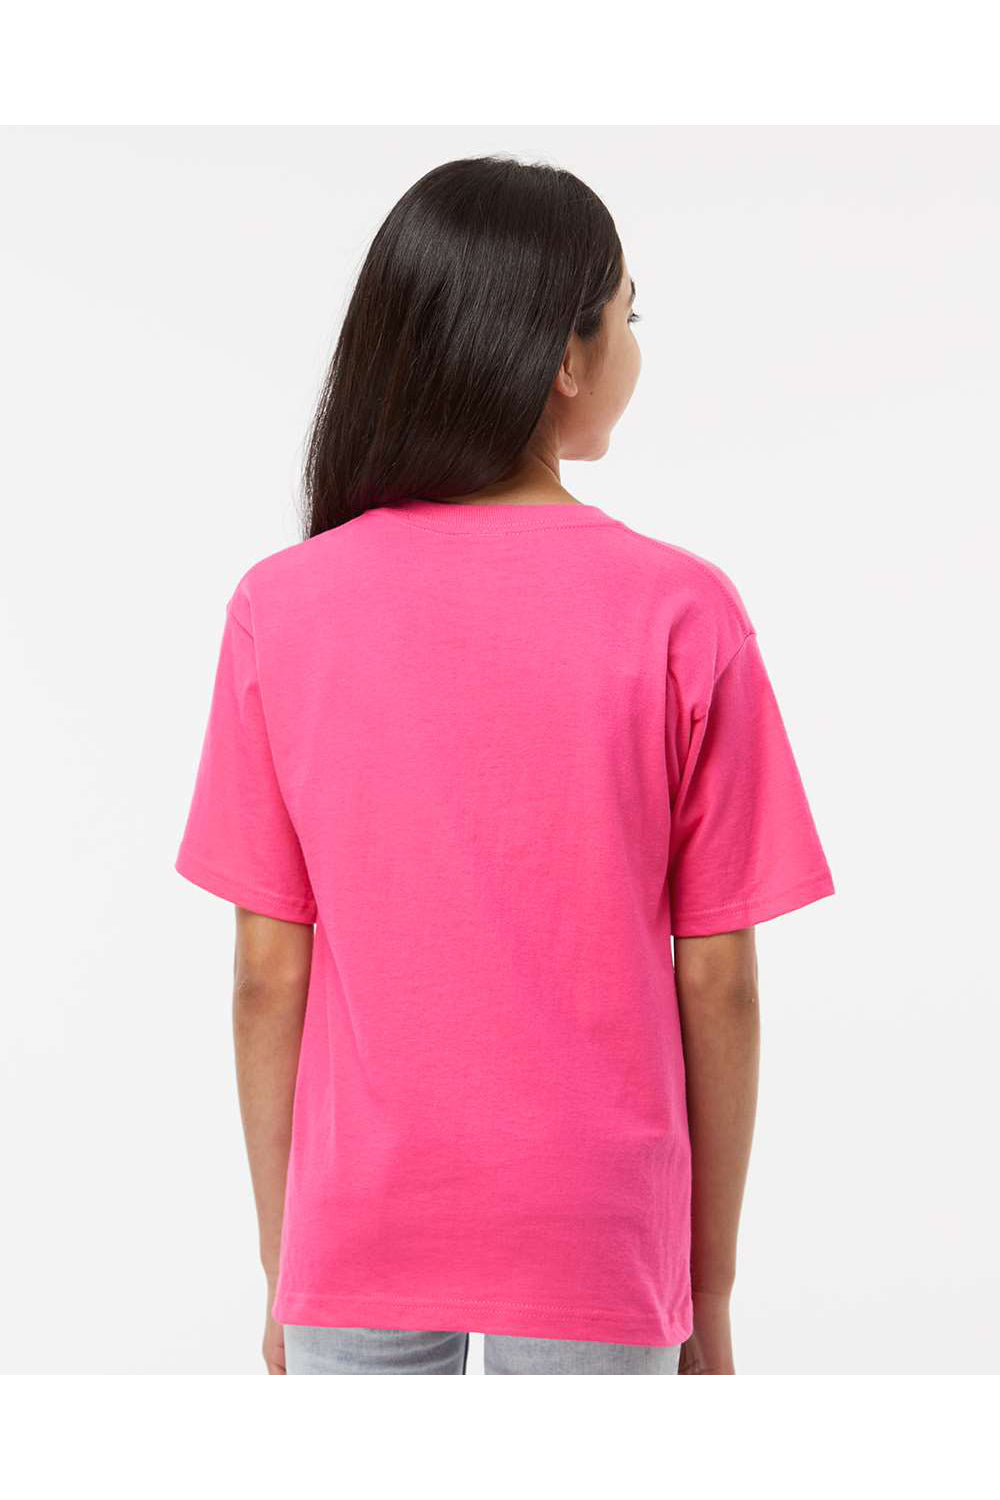 M&O 4850 Youth Gold Soft Touch Short Sleeve Crewneck T-Shirt Heliconia Pink Model Back